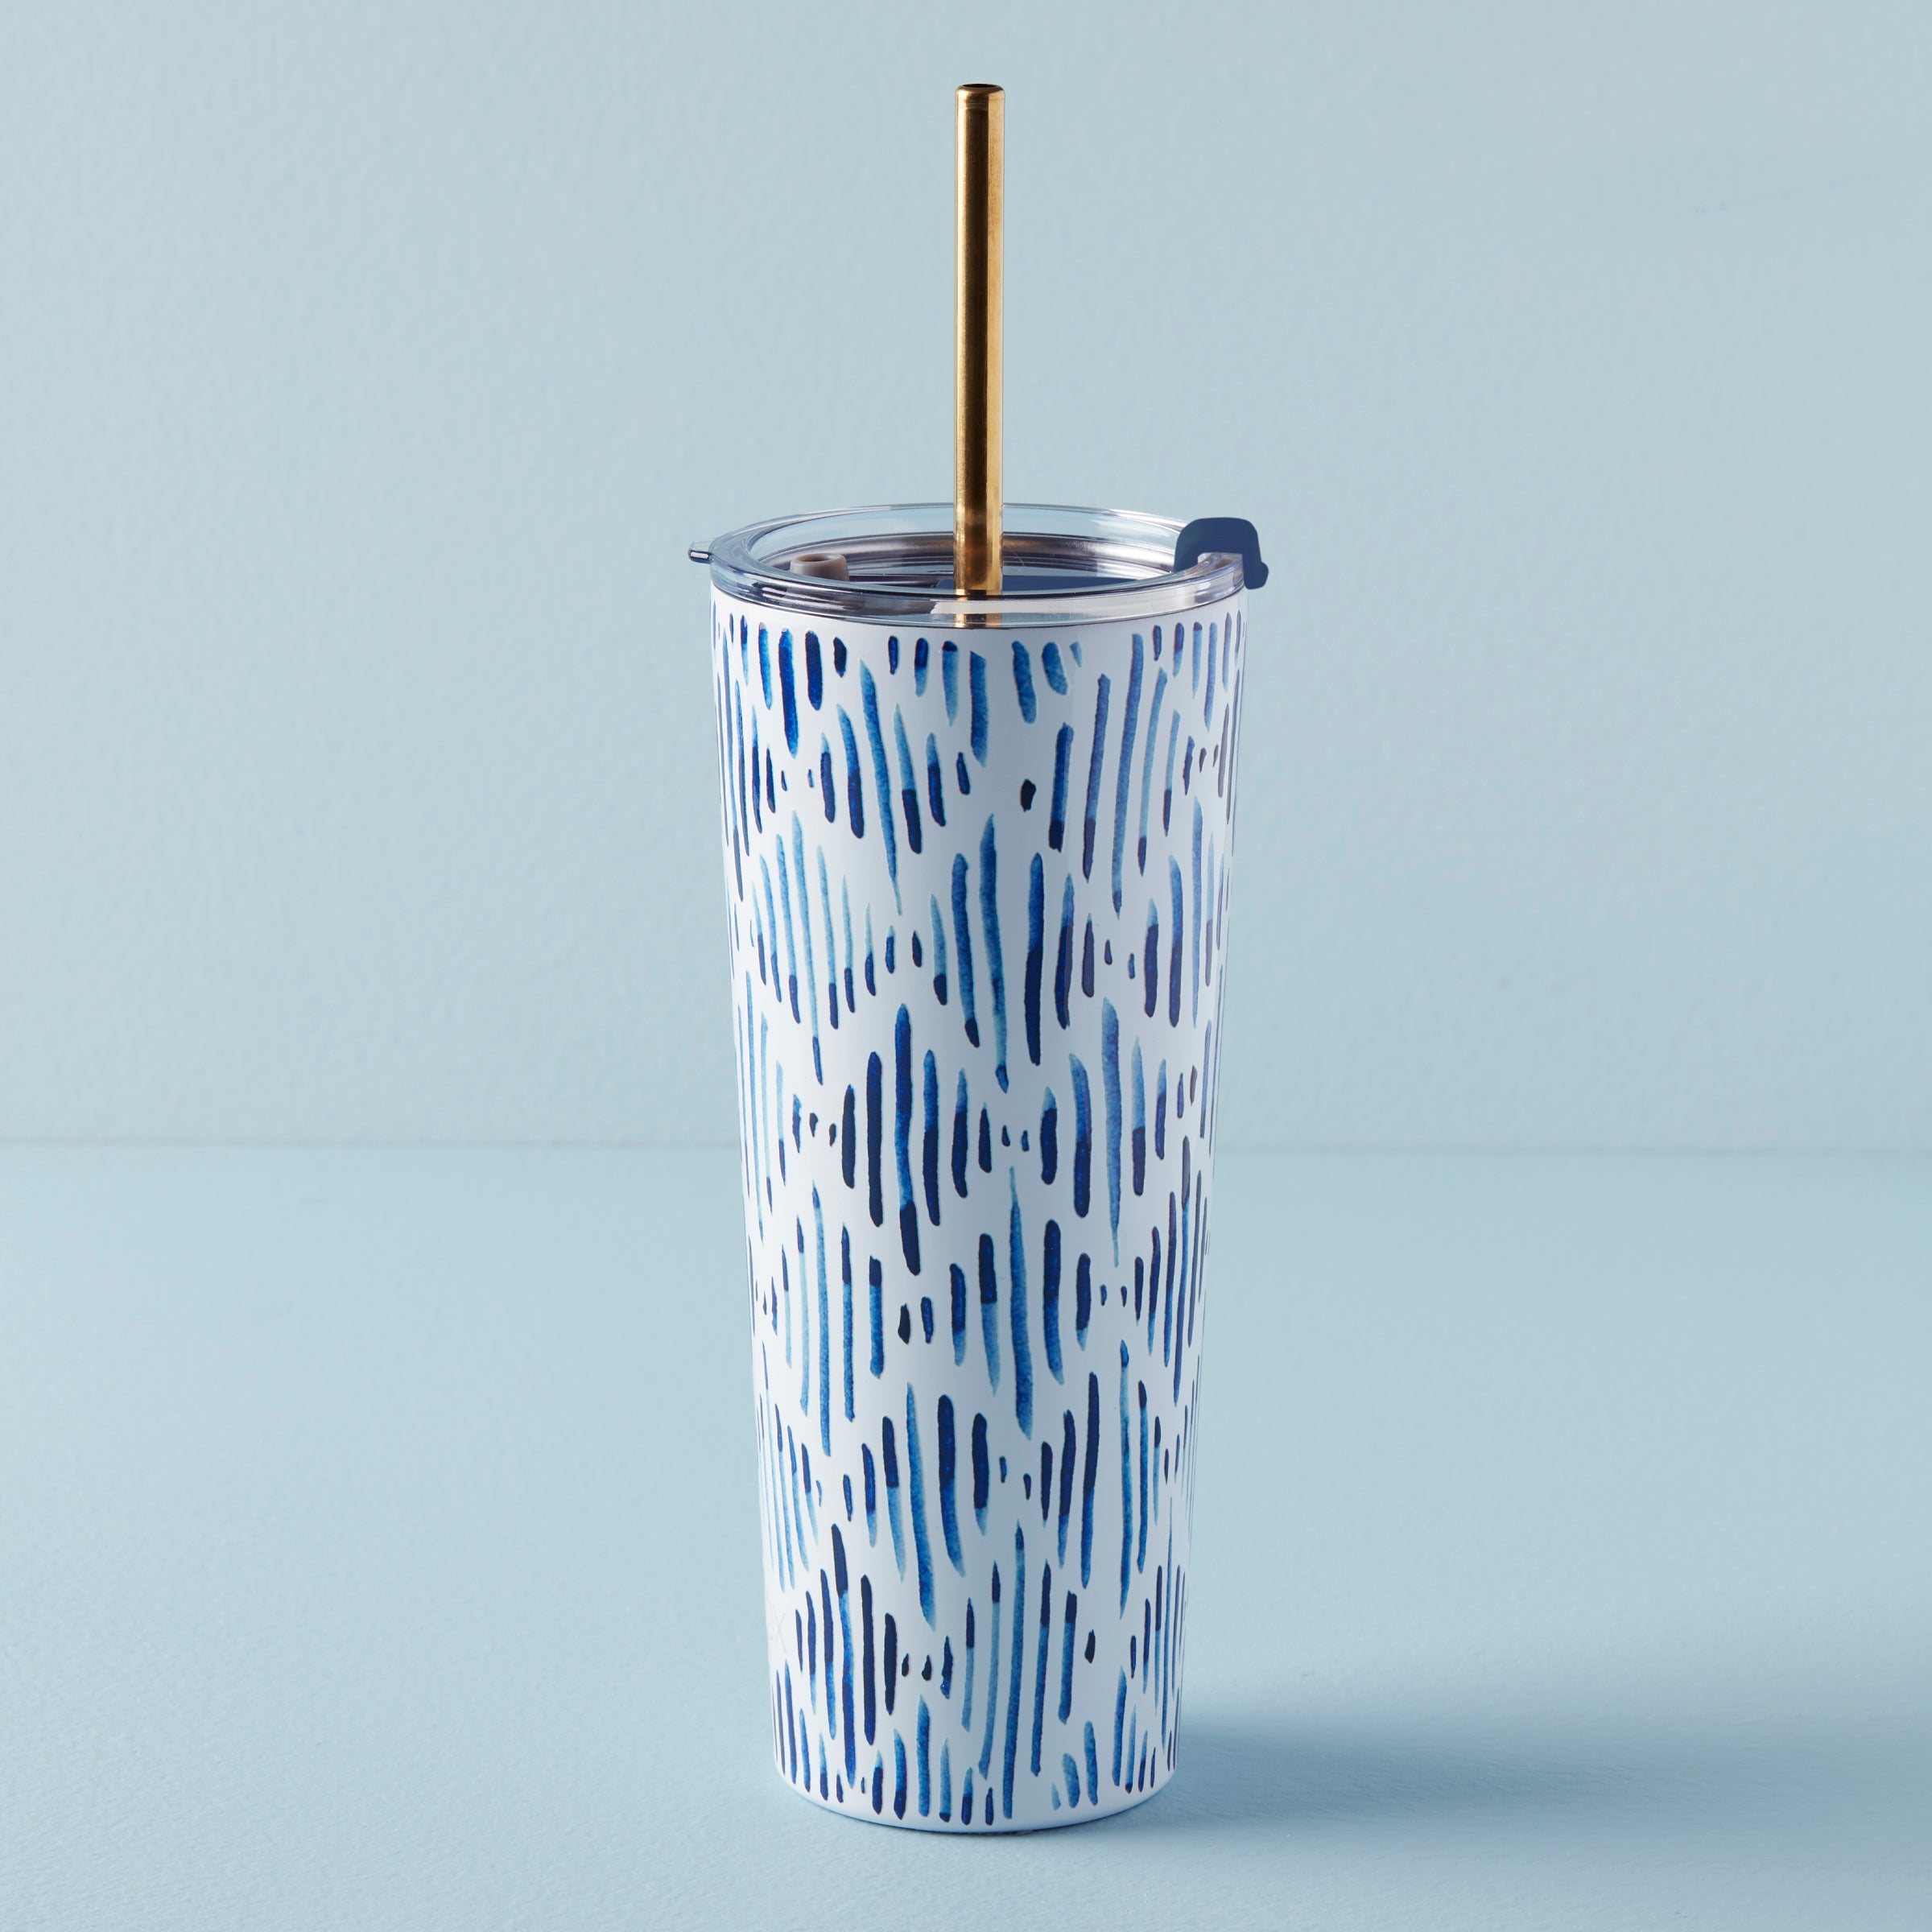 Tumbler Straw, Stainless Steel